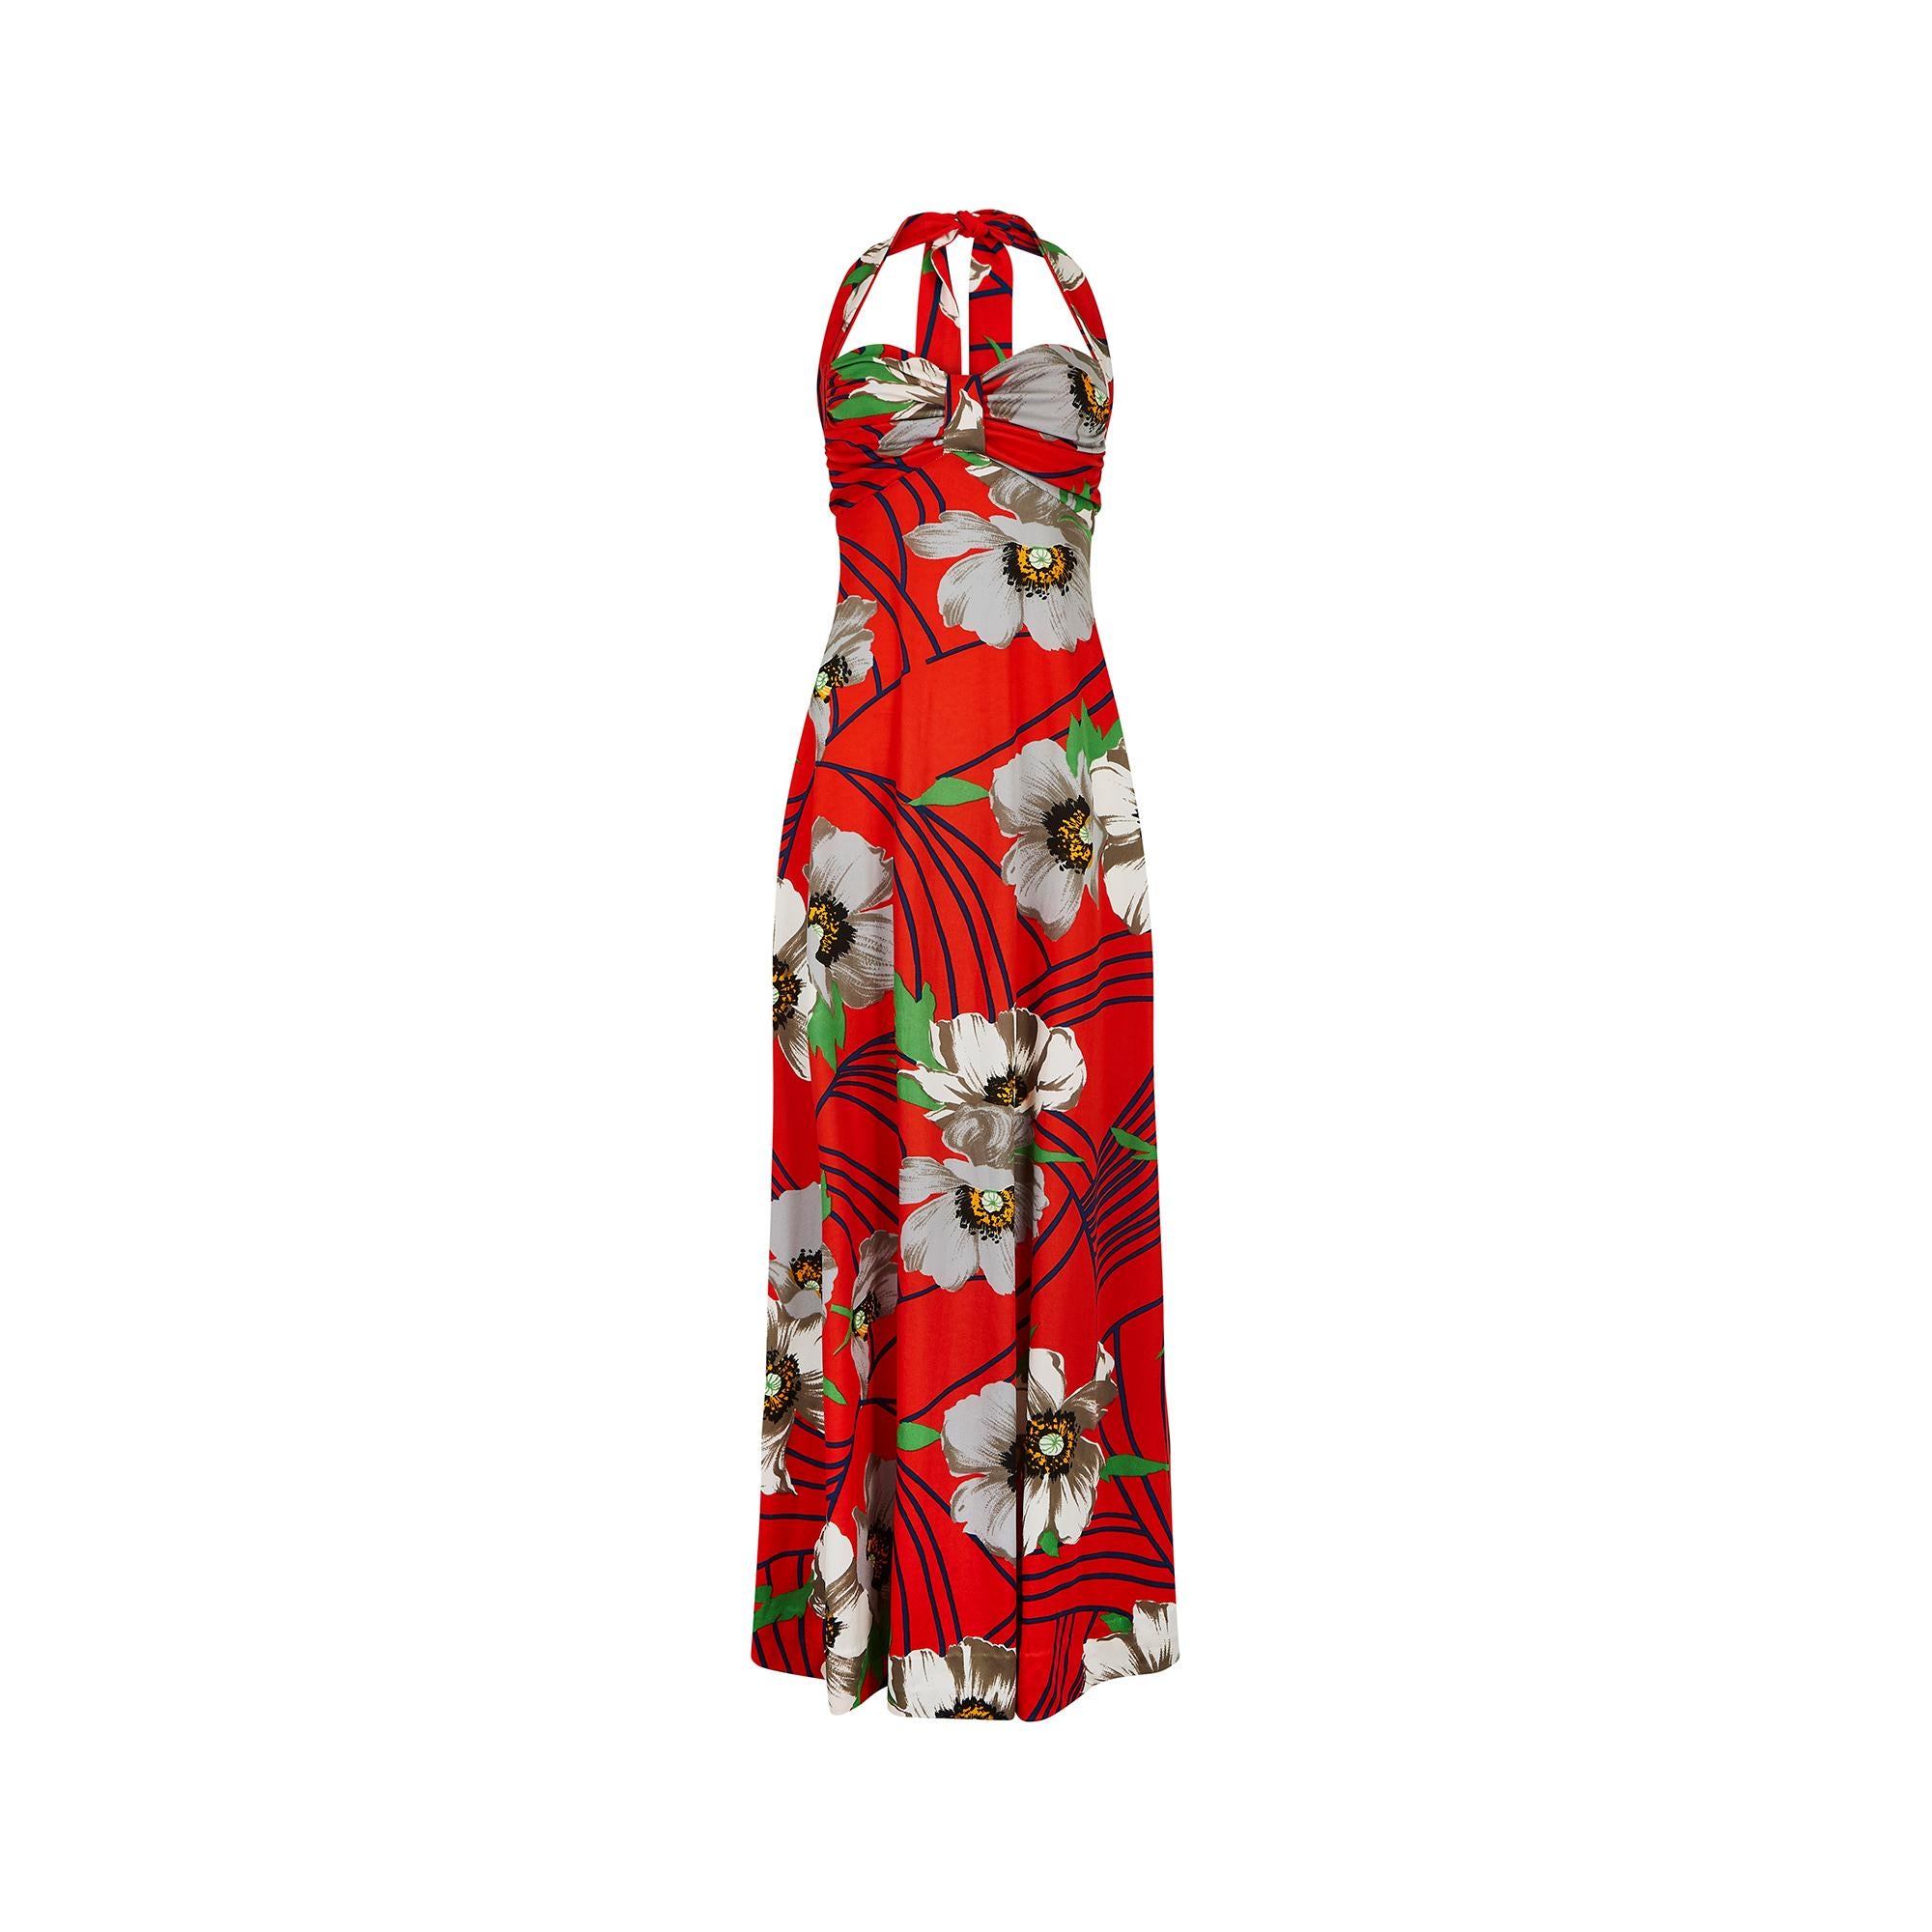 Glamorous vintage Cote d'Azur resort wear by Laurent Servet.  The ankle length dress is a bright red featuring a striking floral pattern of white, navy, green and yellow poppies.  It really encapsulates that summer by the pool feeling and dates to